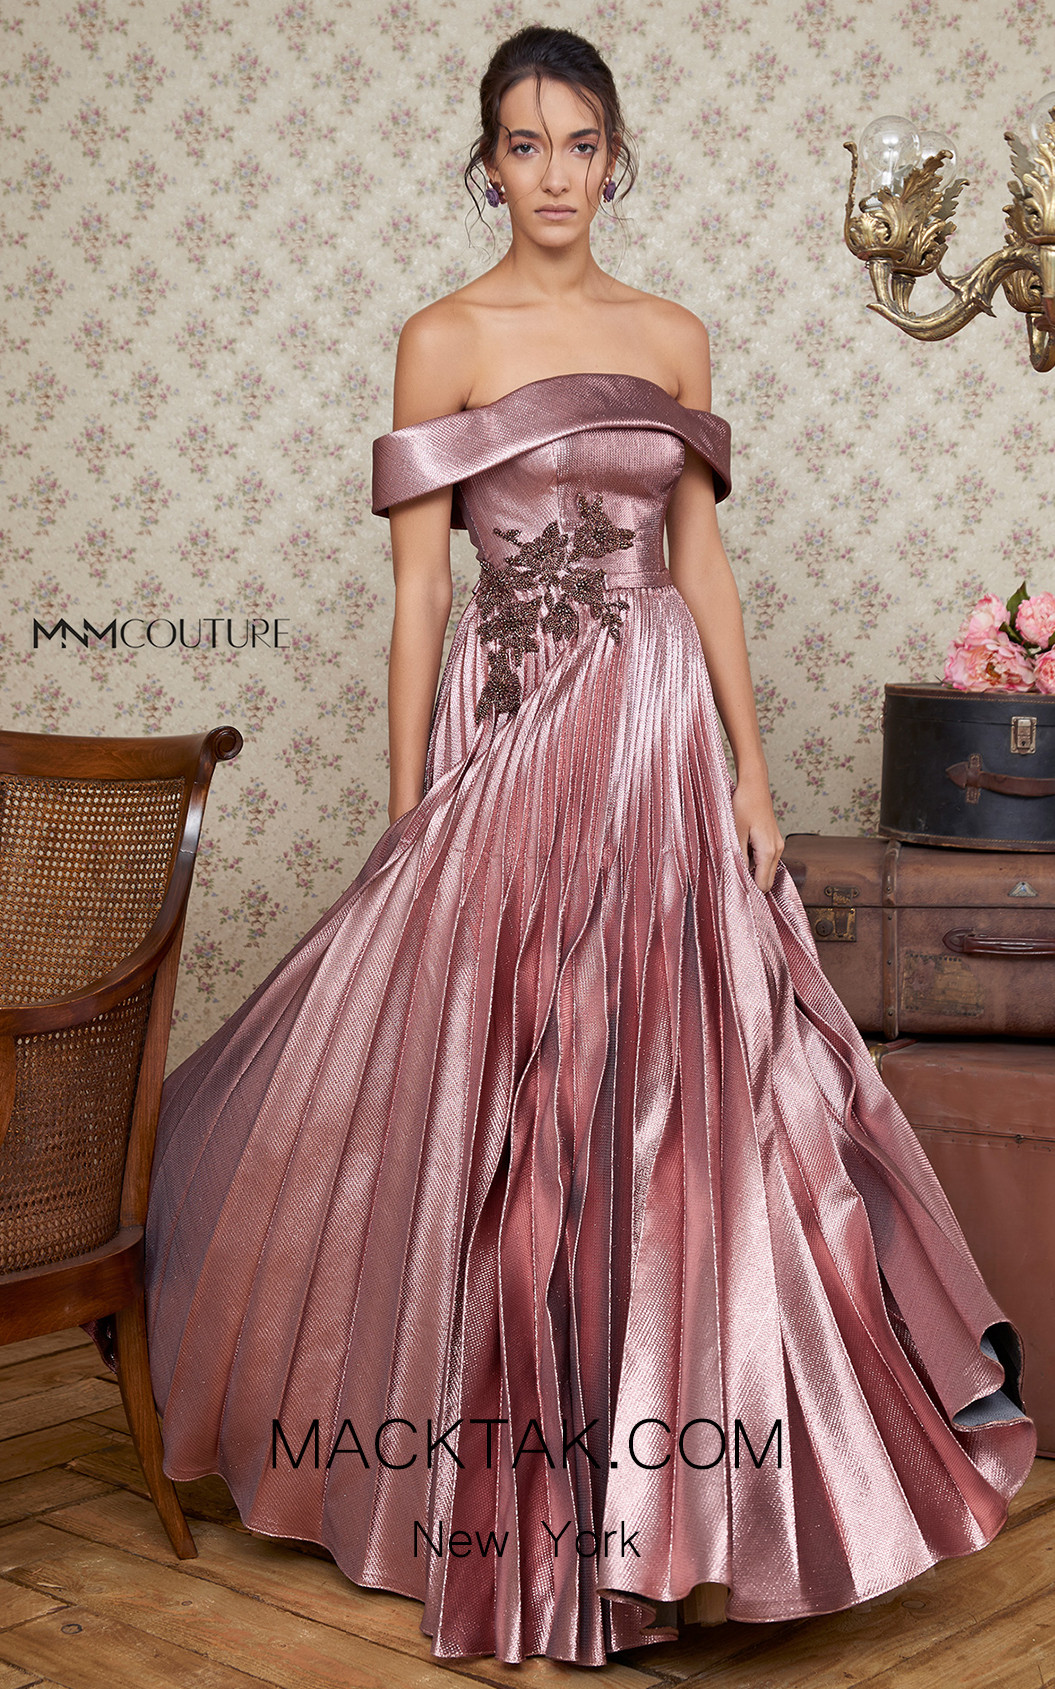 MNM Couture N0351 Front Dress